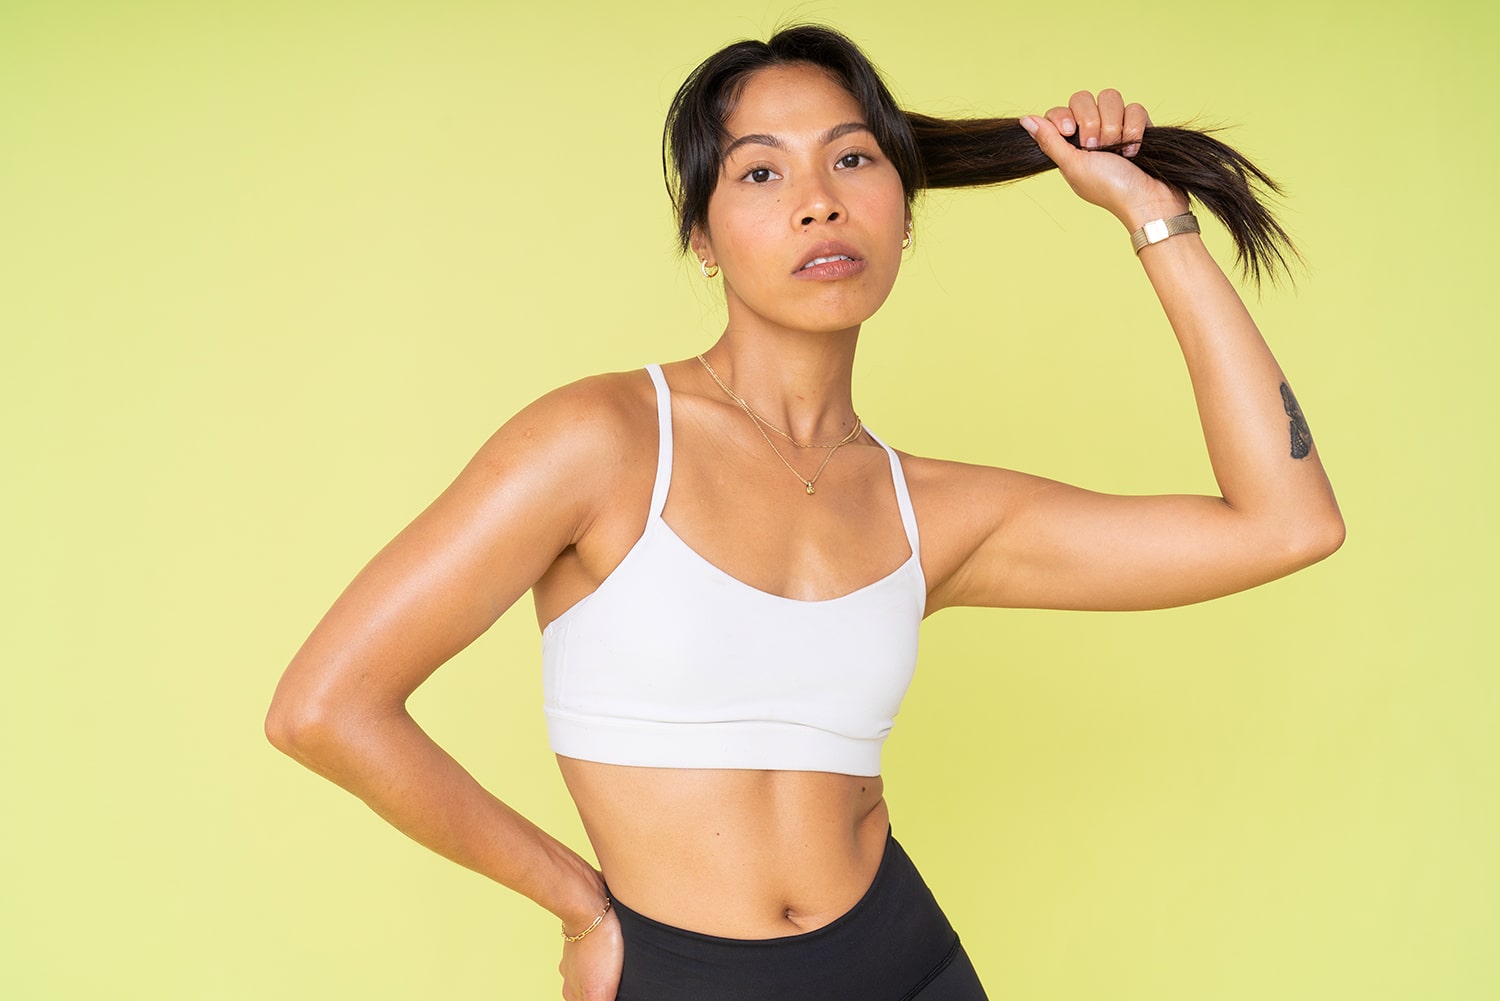 Half-length shot of a model wearing gym attire against a vibrant Spectrum Lemon Lime Splice Green Paper backdrop. The model is holding her ponytail, demonstrating a moment of active movement.